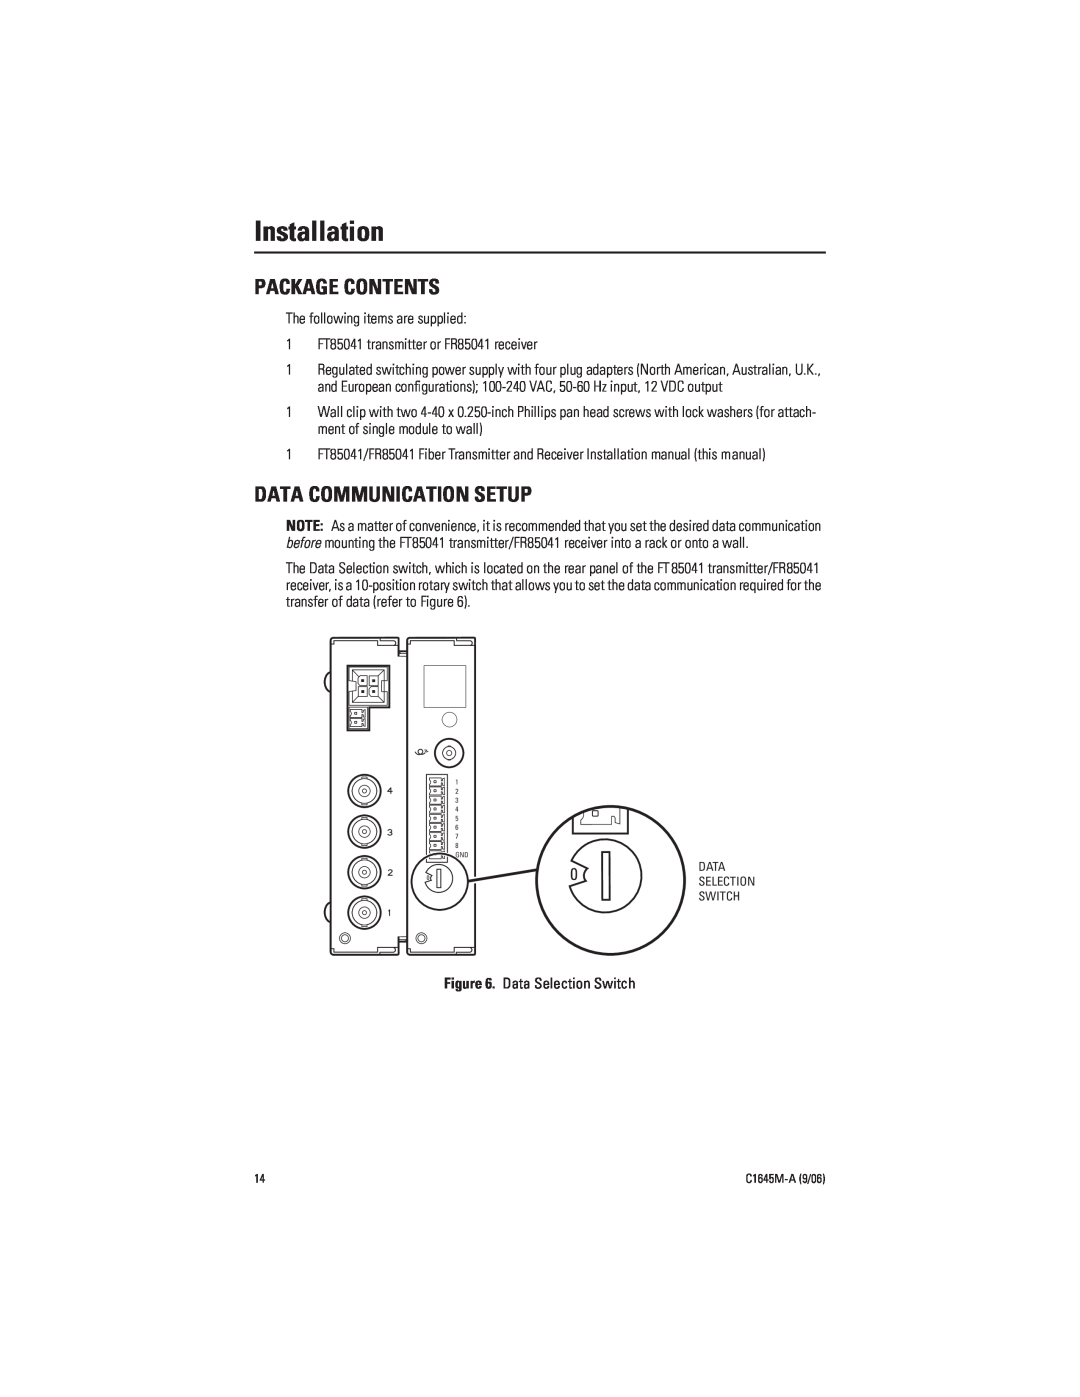 Pelco FR85041 installation manual Installation, Package Contents, Data Communication Setup 